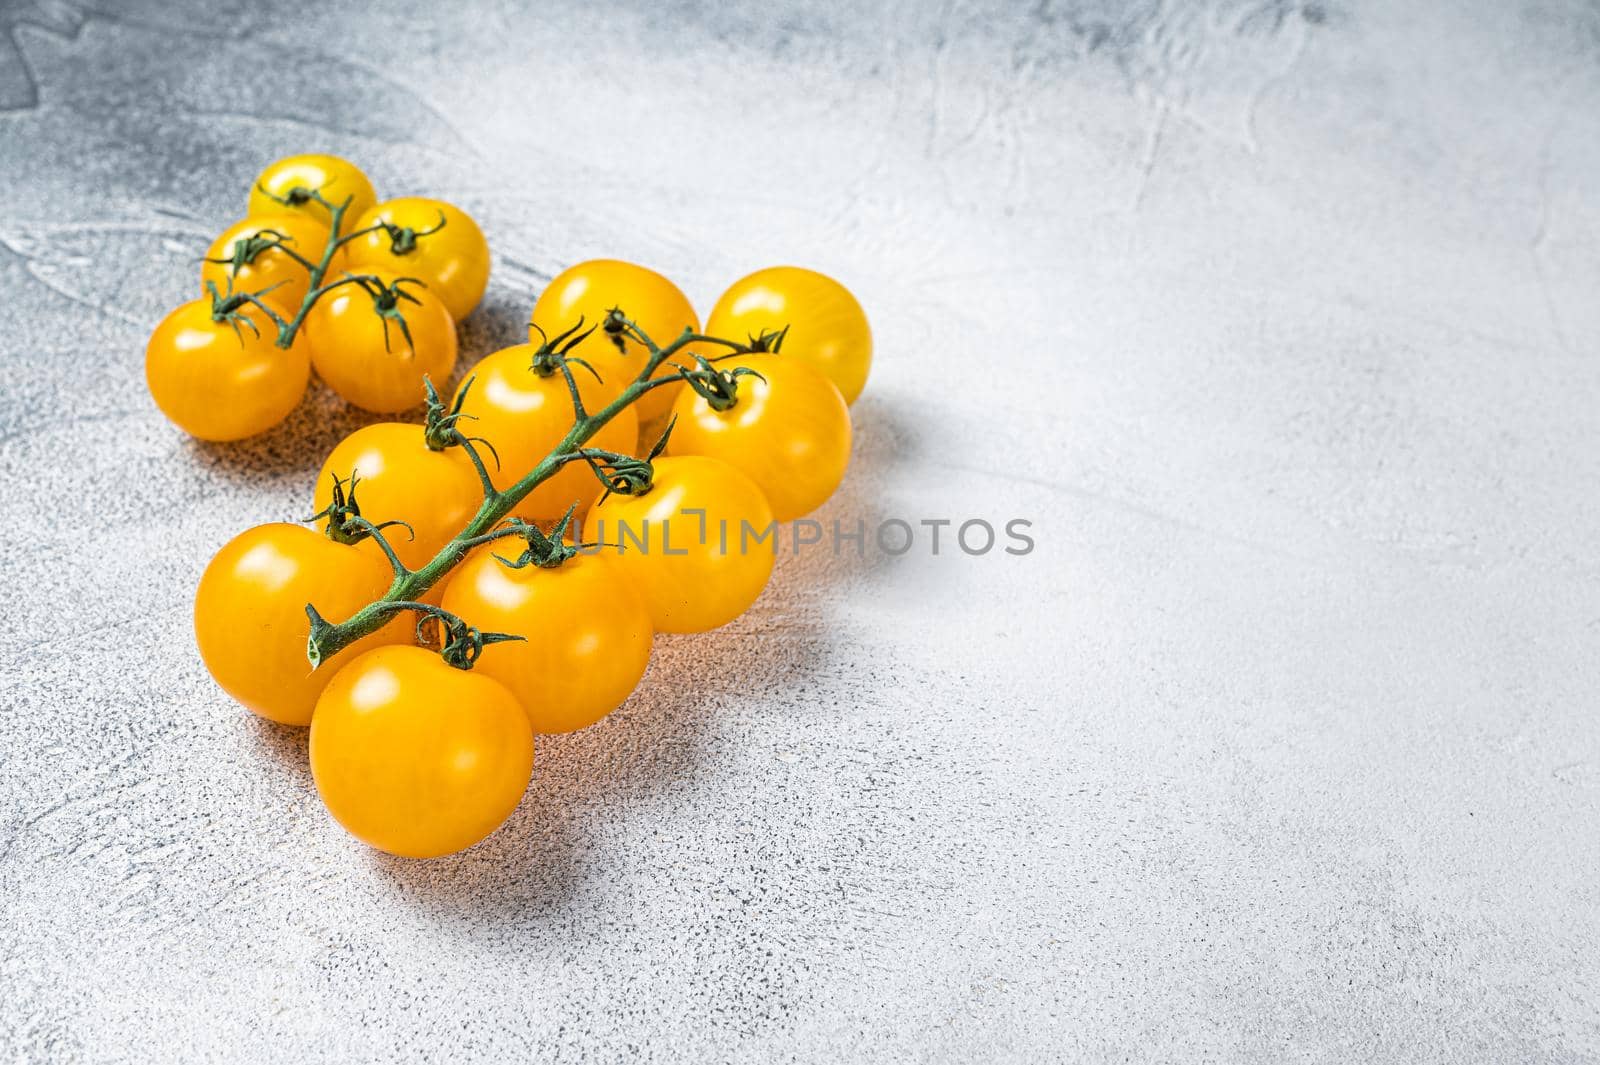 Small yellow cherry tomato on a kitchen table. White background. Top view. Copy space by Composter